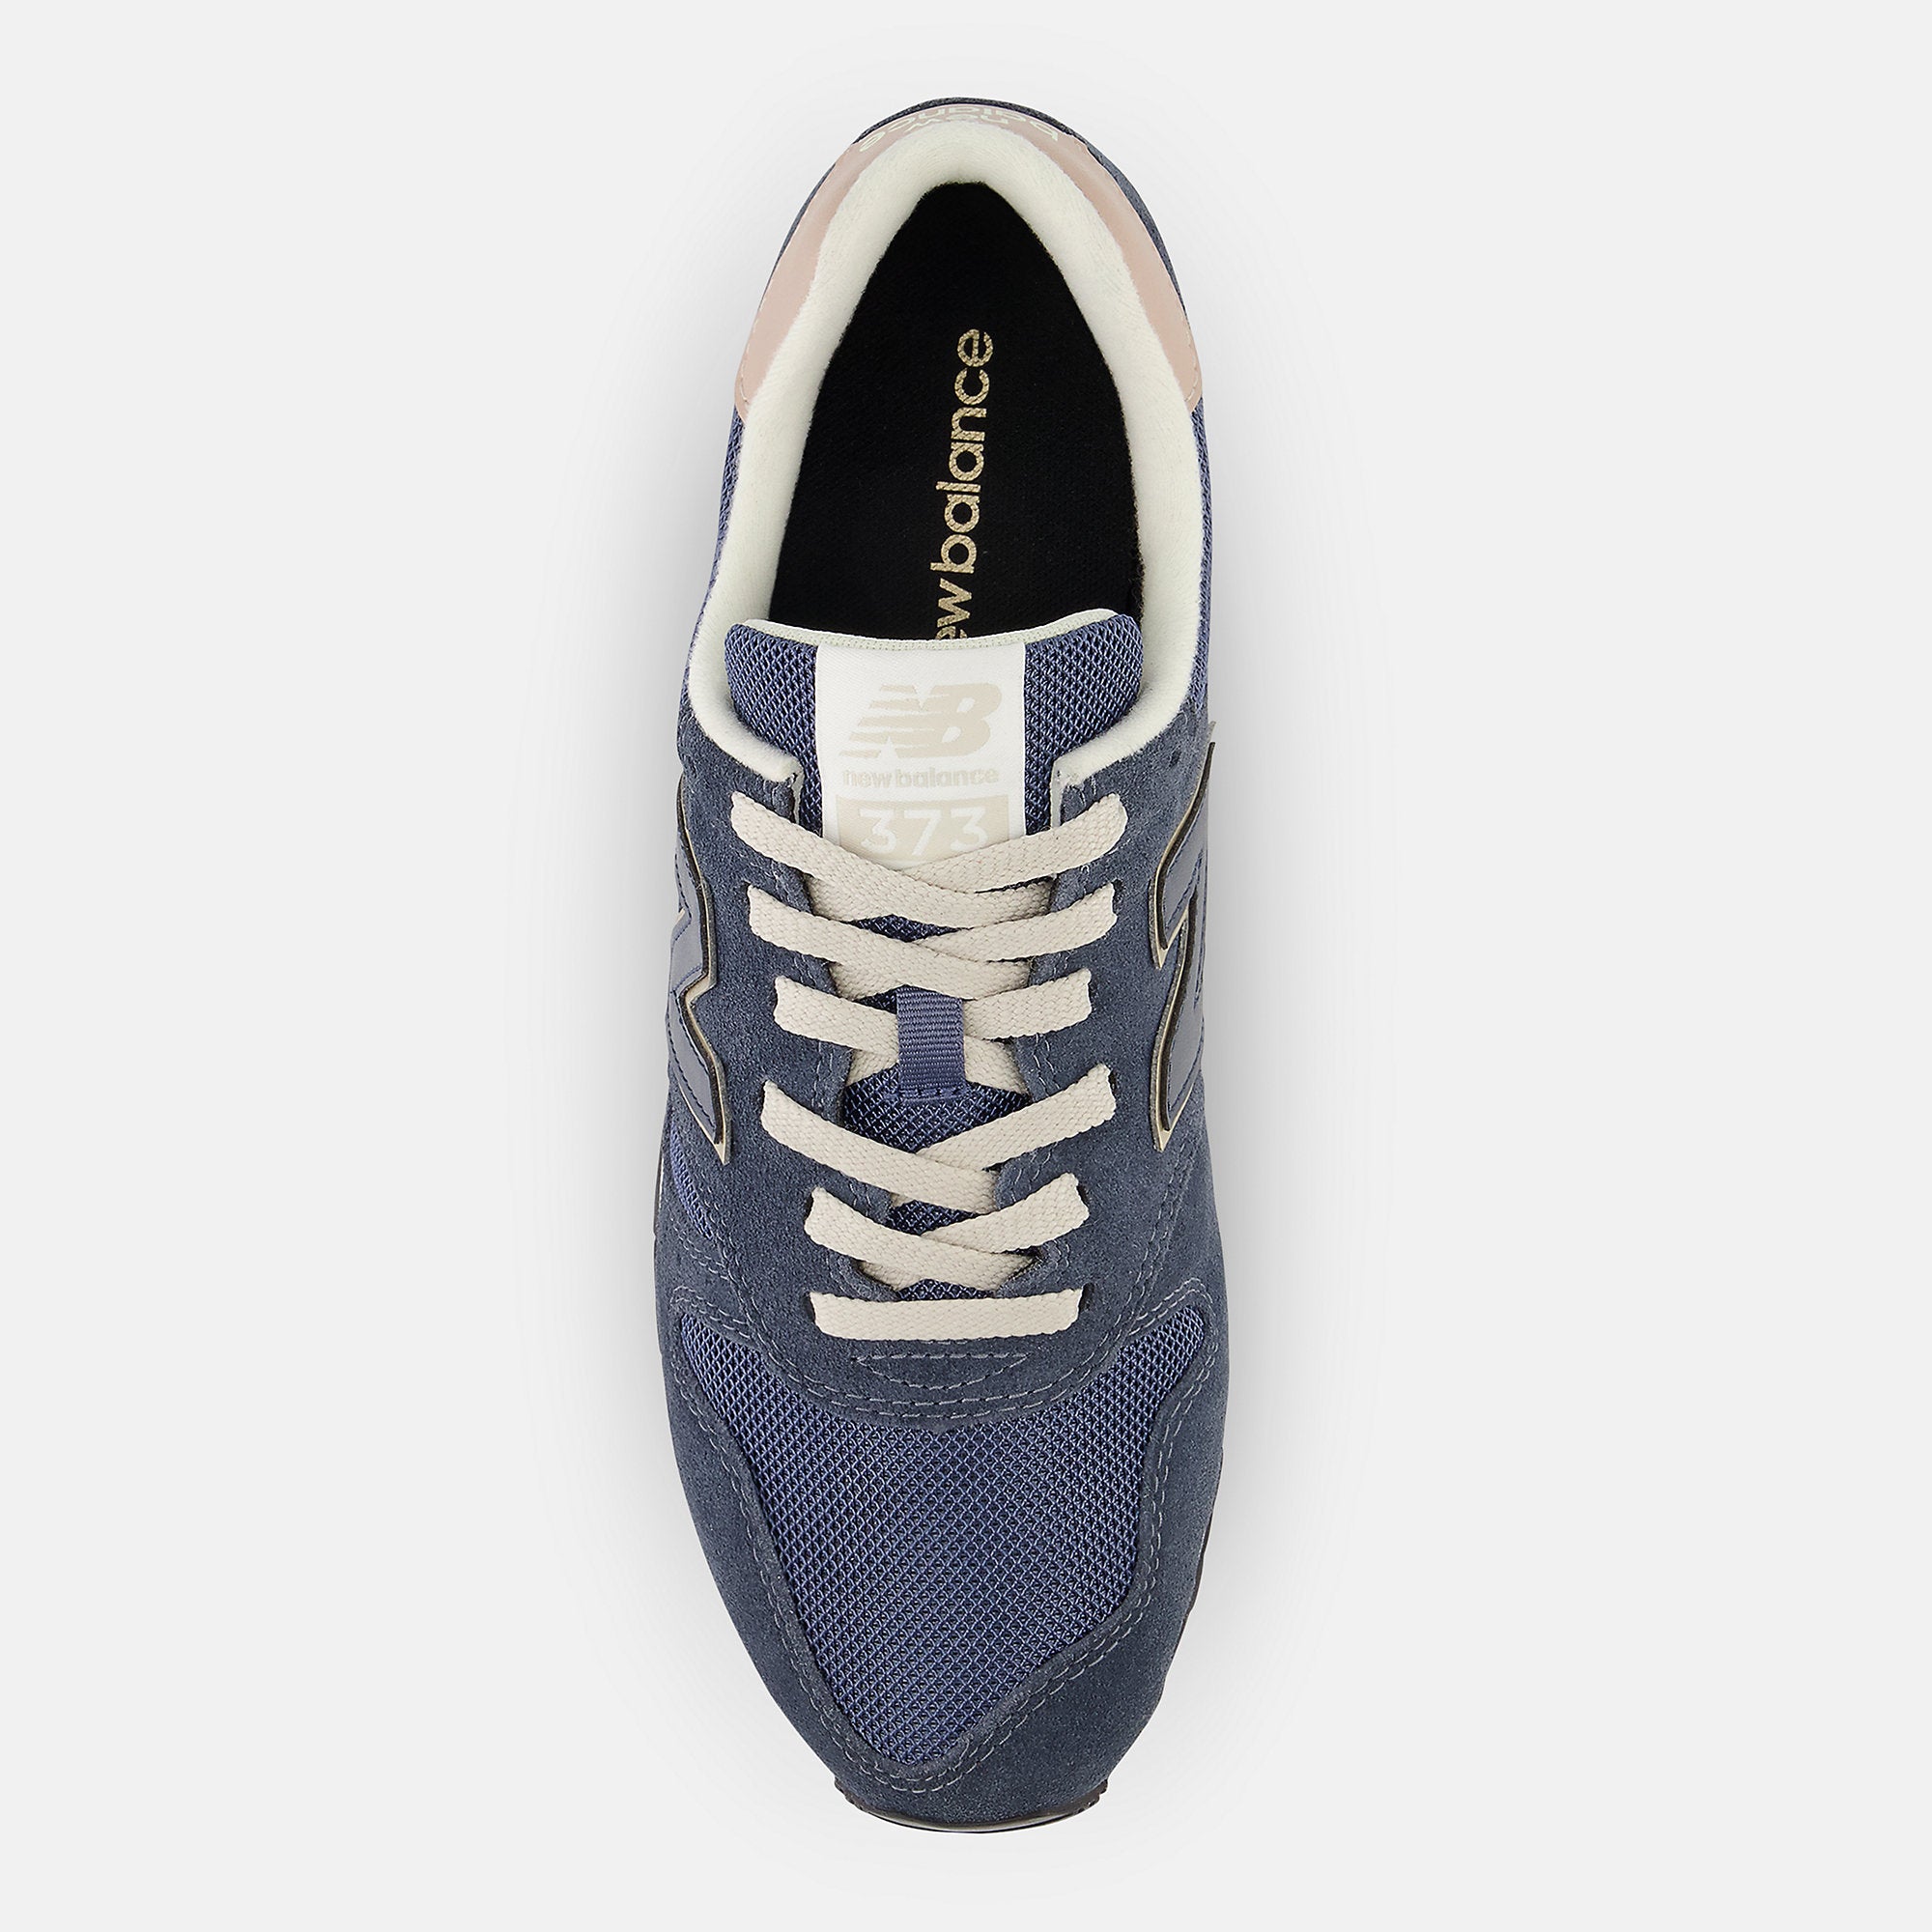 New Balance Mens 373 Fashion Trainers - Outerspace / Indigo